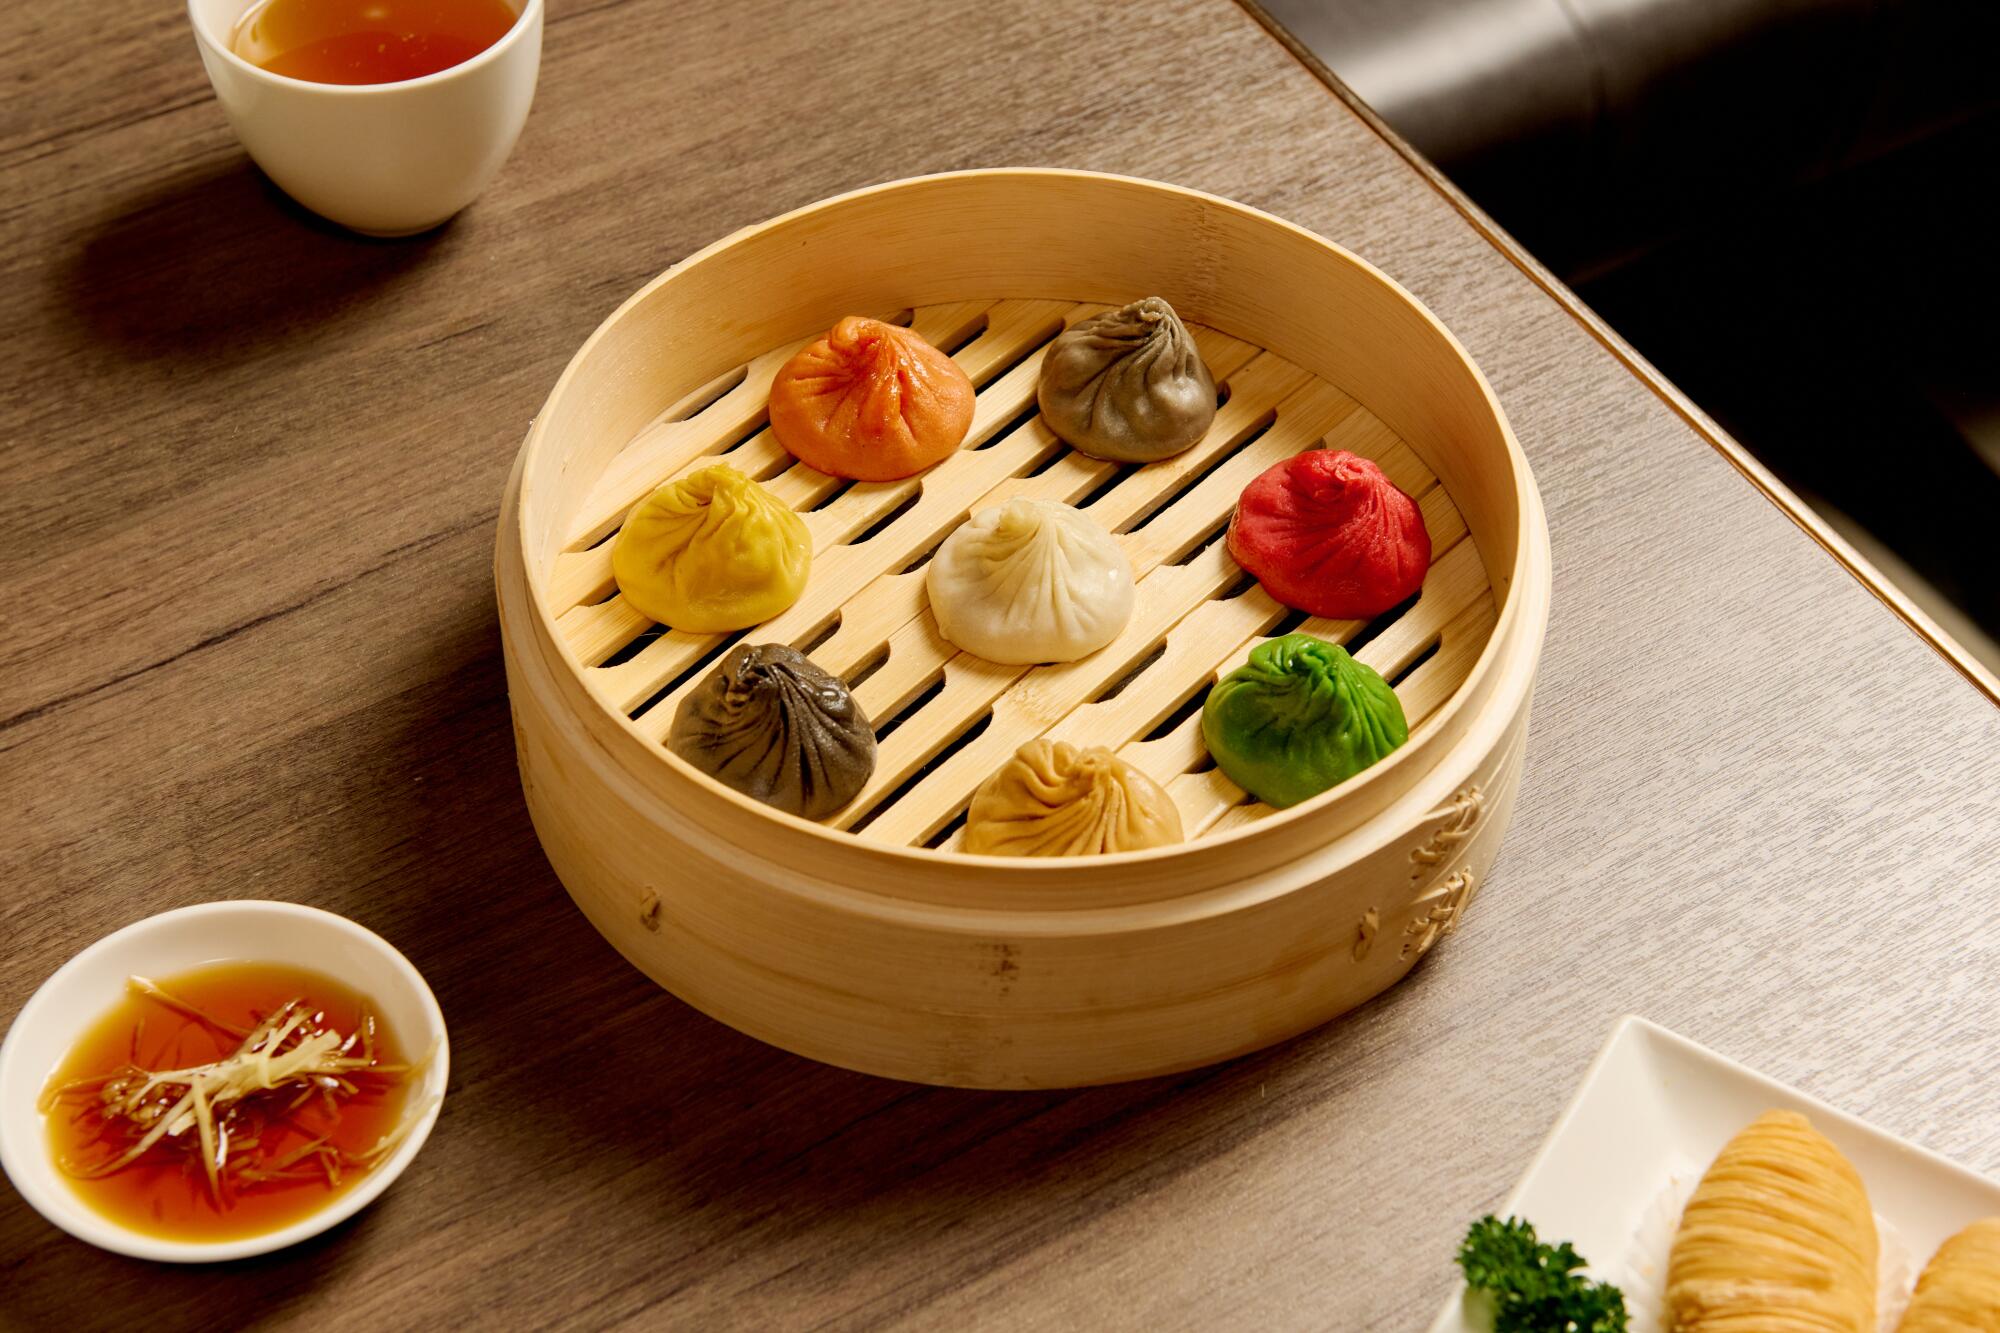 A rainbow of soup dumplings in a steamer basket with small dishes of sauces